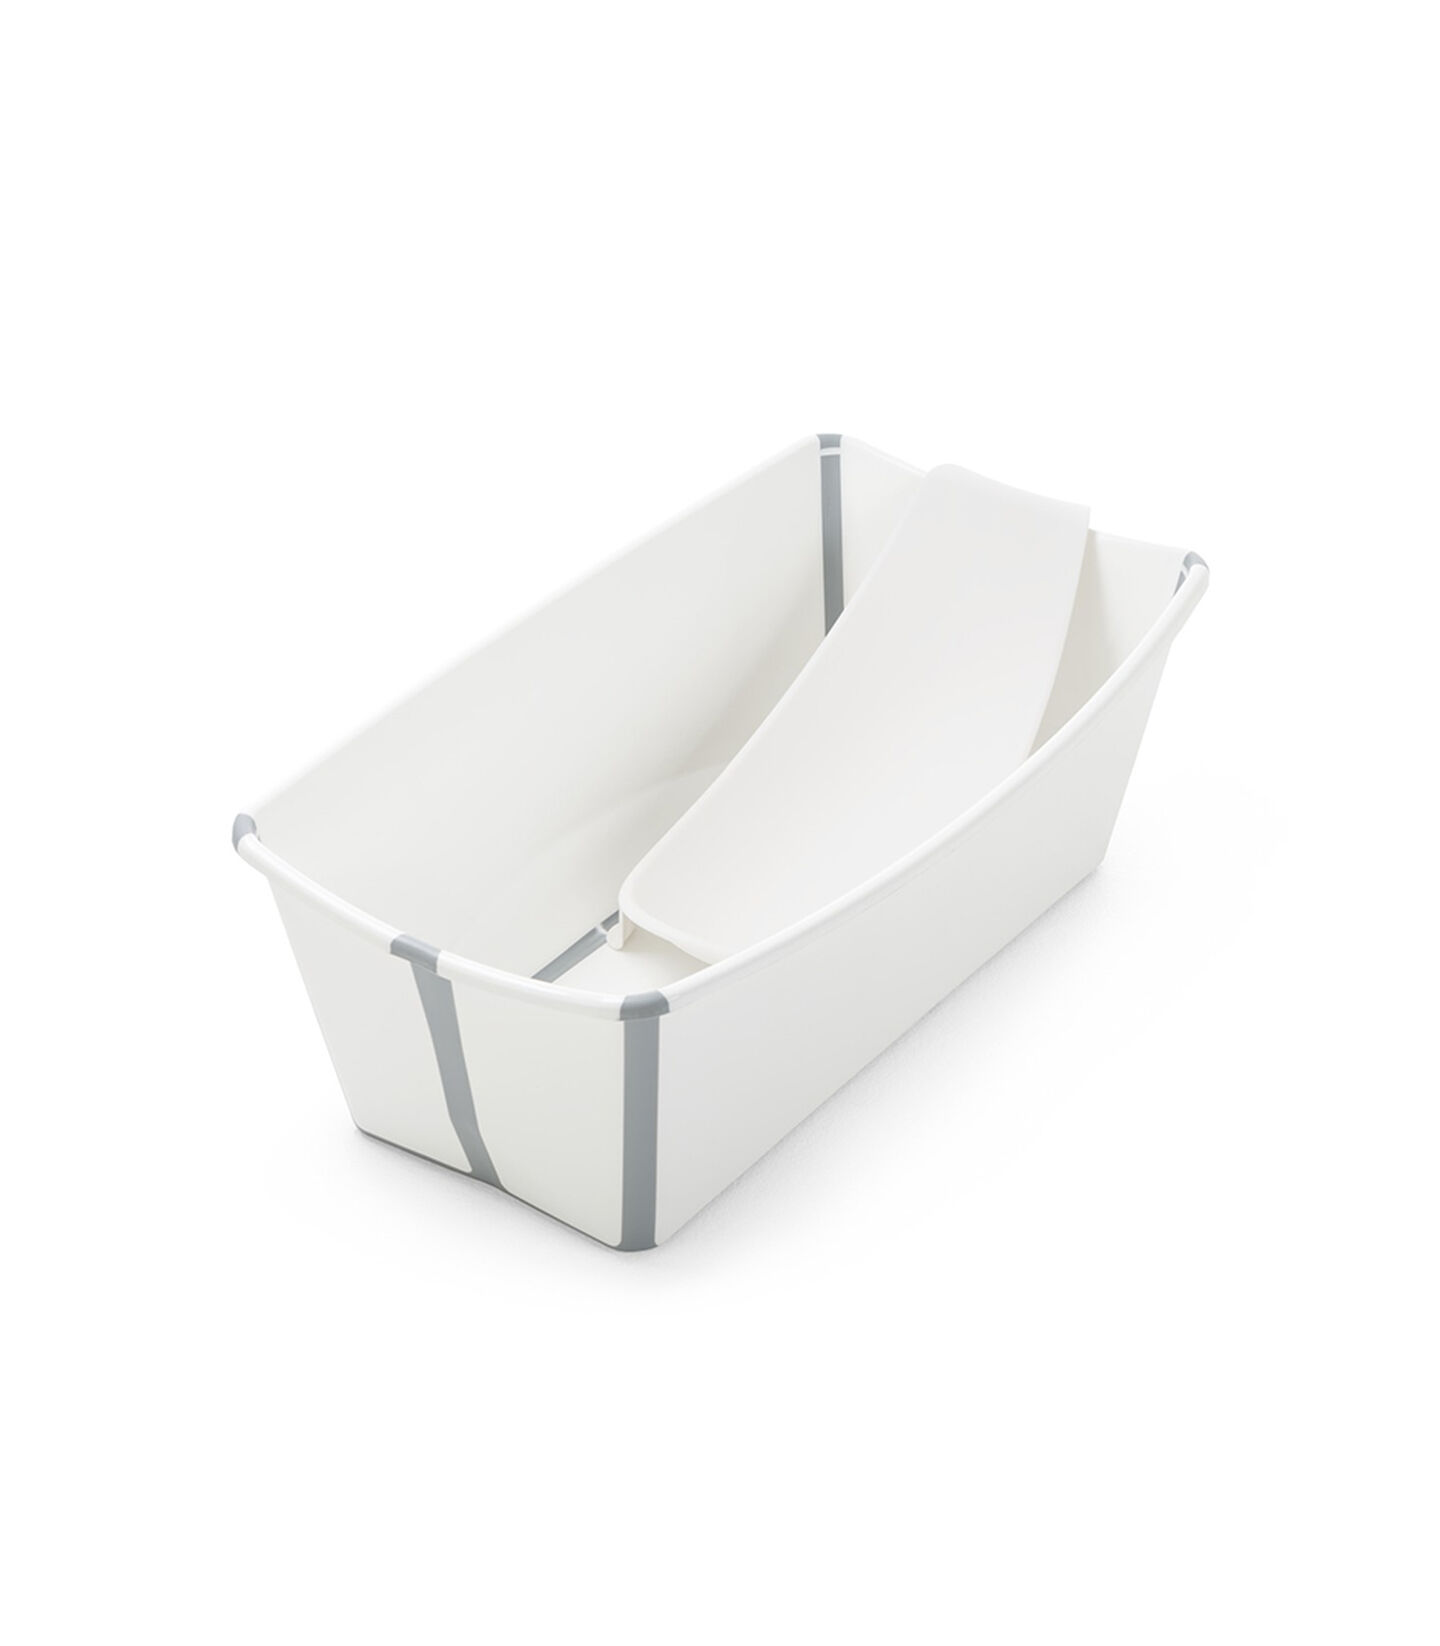 Stokke® Flexi Bath® Bundle Tub with Support White, Белый, mainview view 1